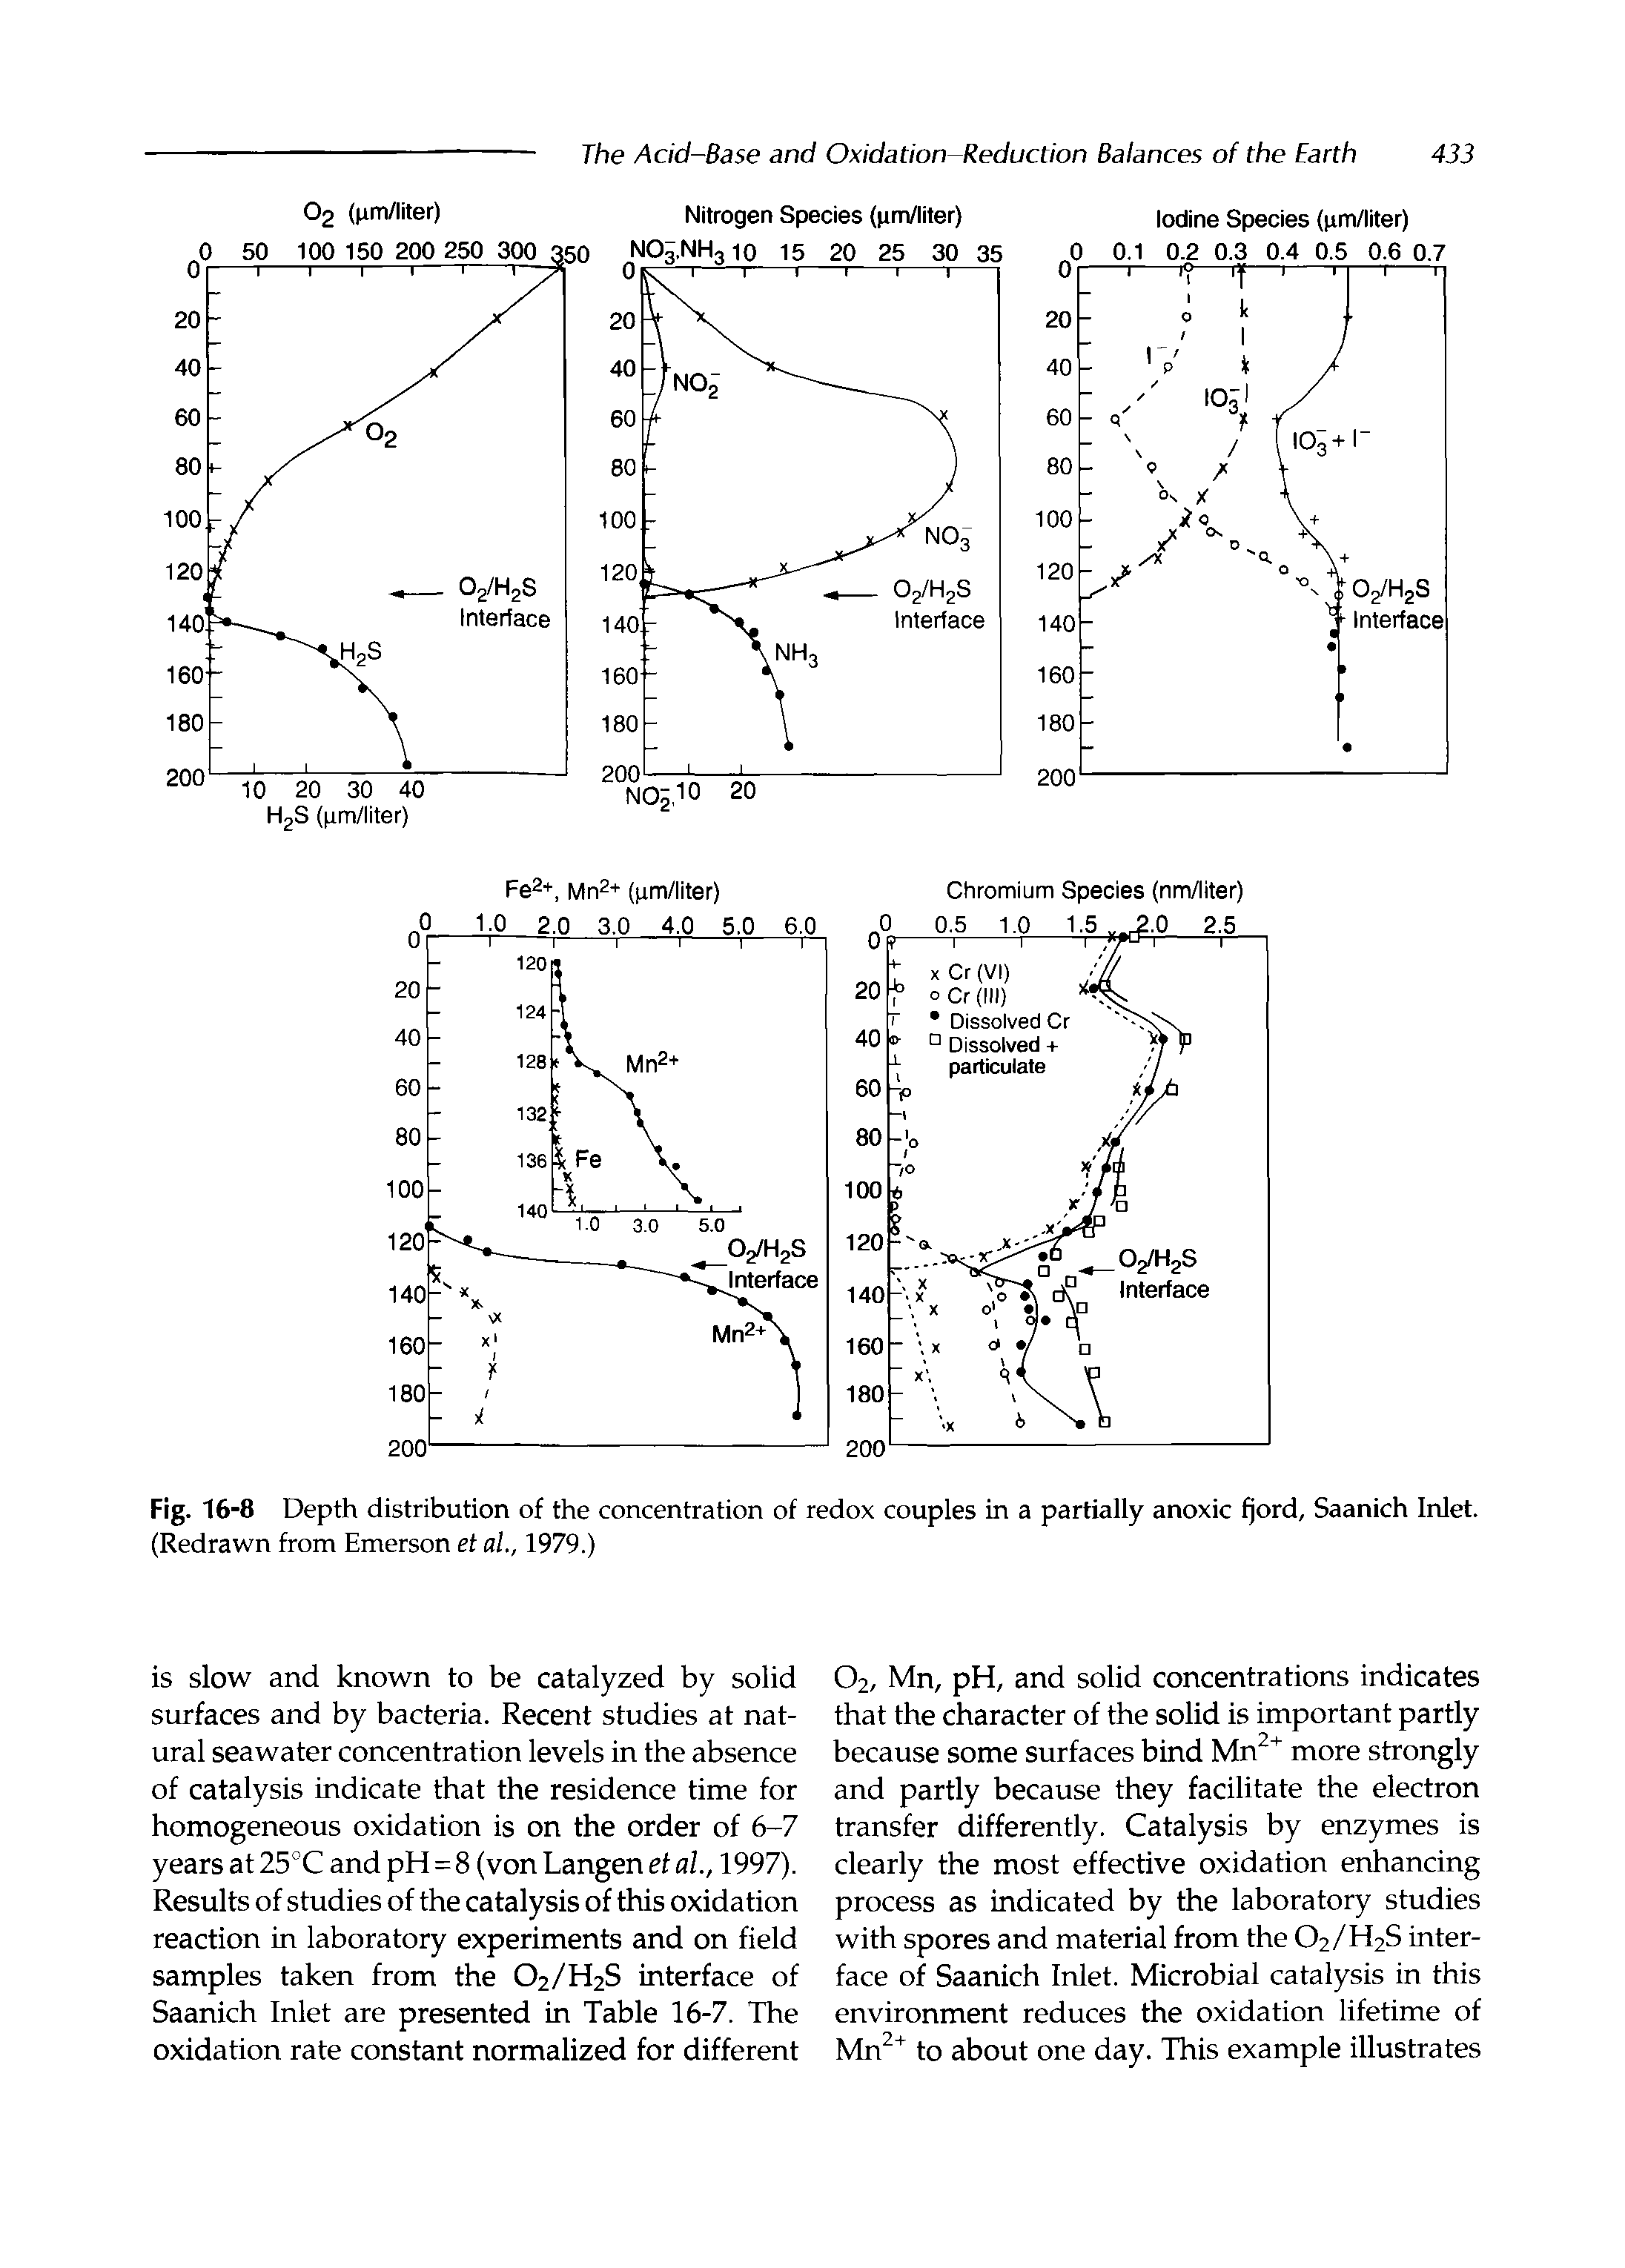 Fig. 16-8 Depth distribution of the concentration of redox couples in a partially anoxic f]ord, Saanich Inlet. (Redrawn from Emerson et al., 1979.)...